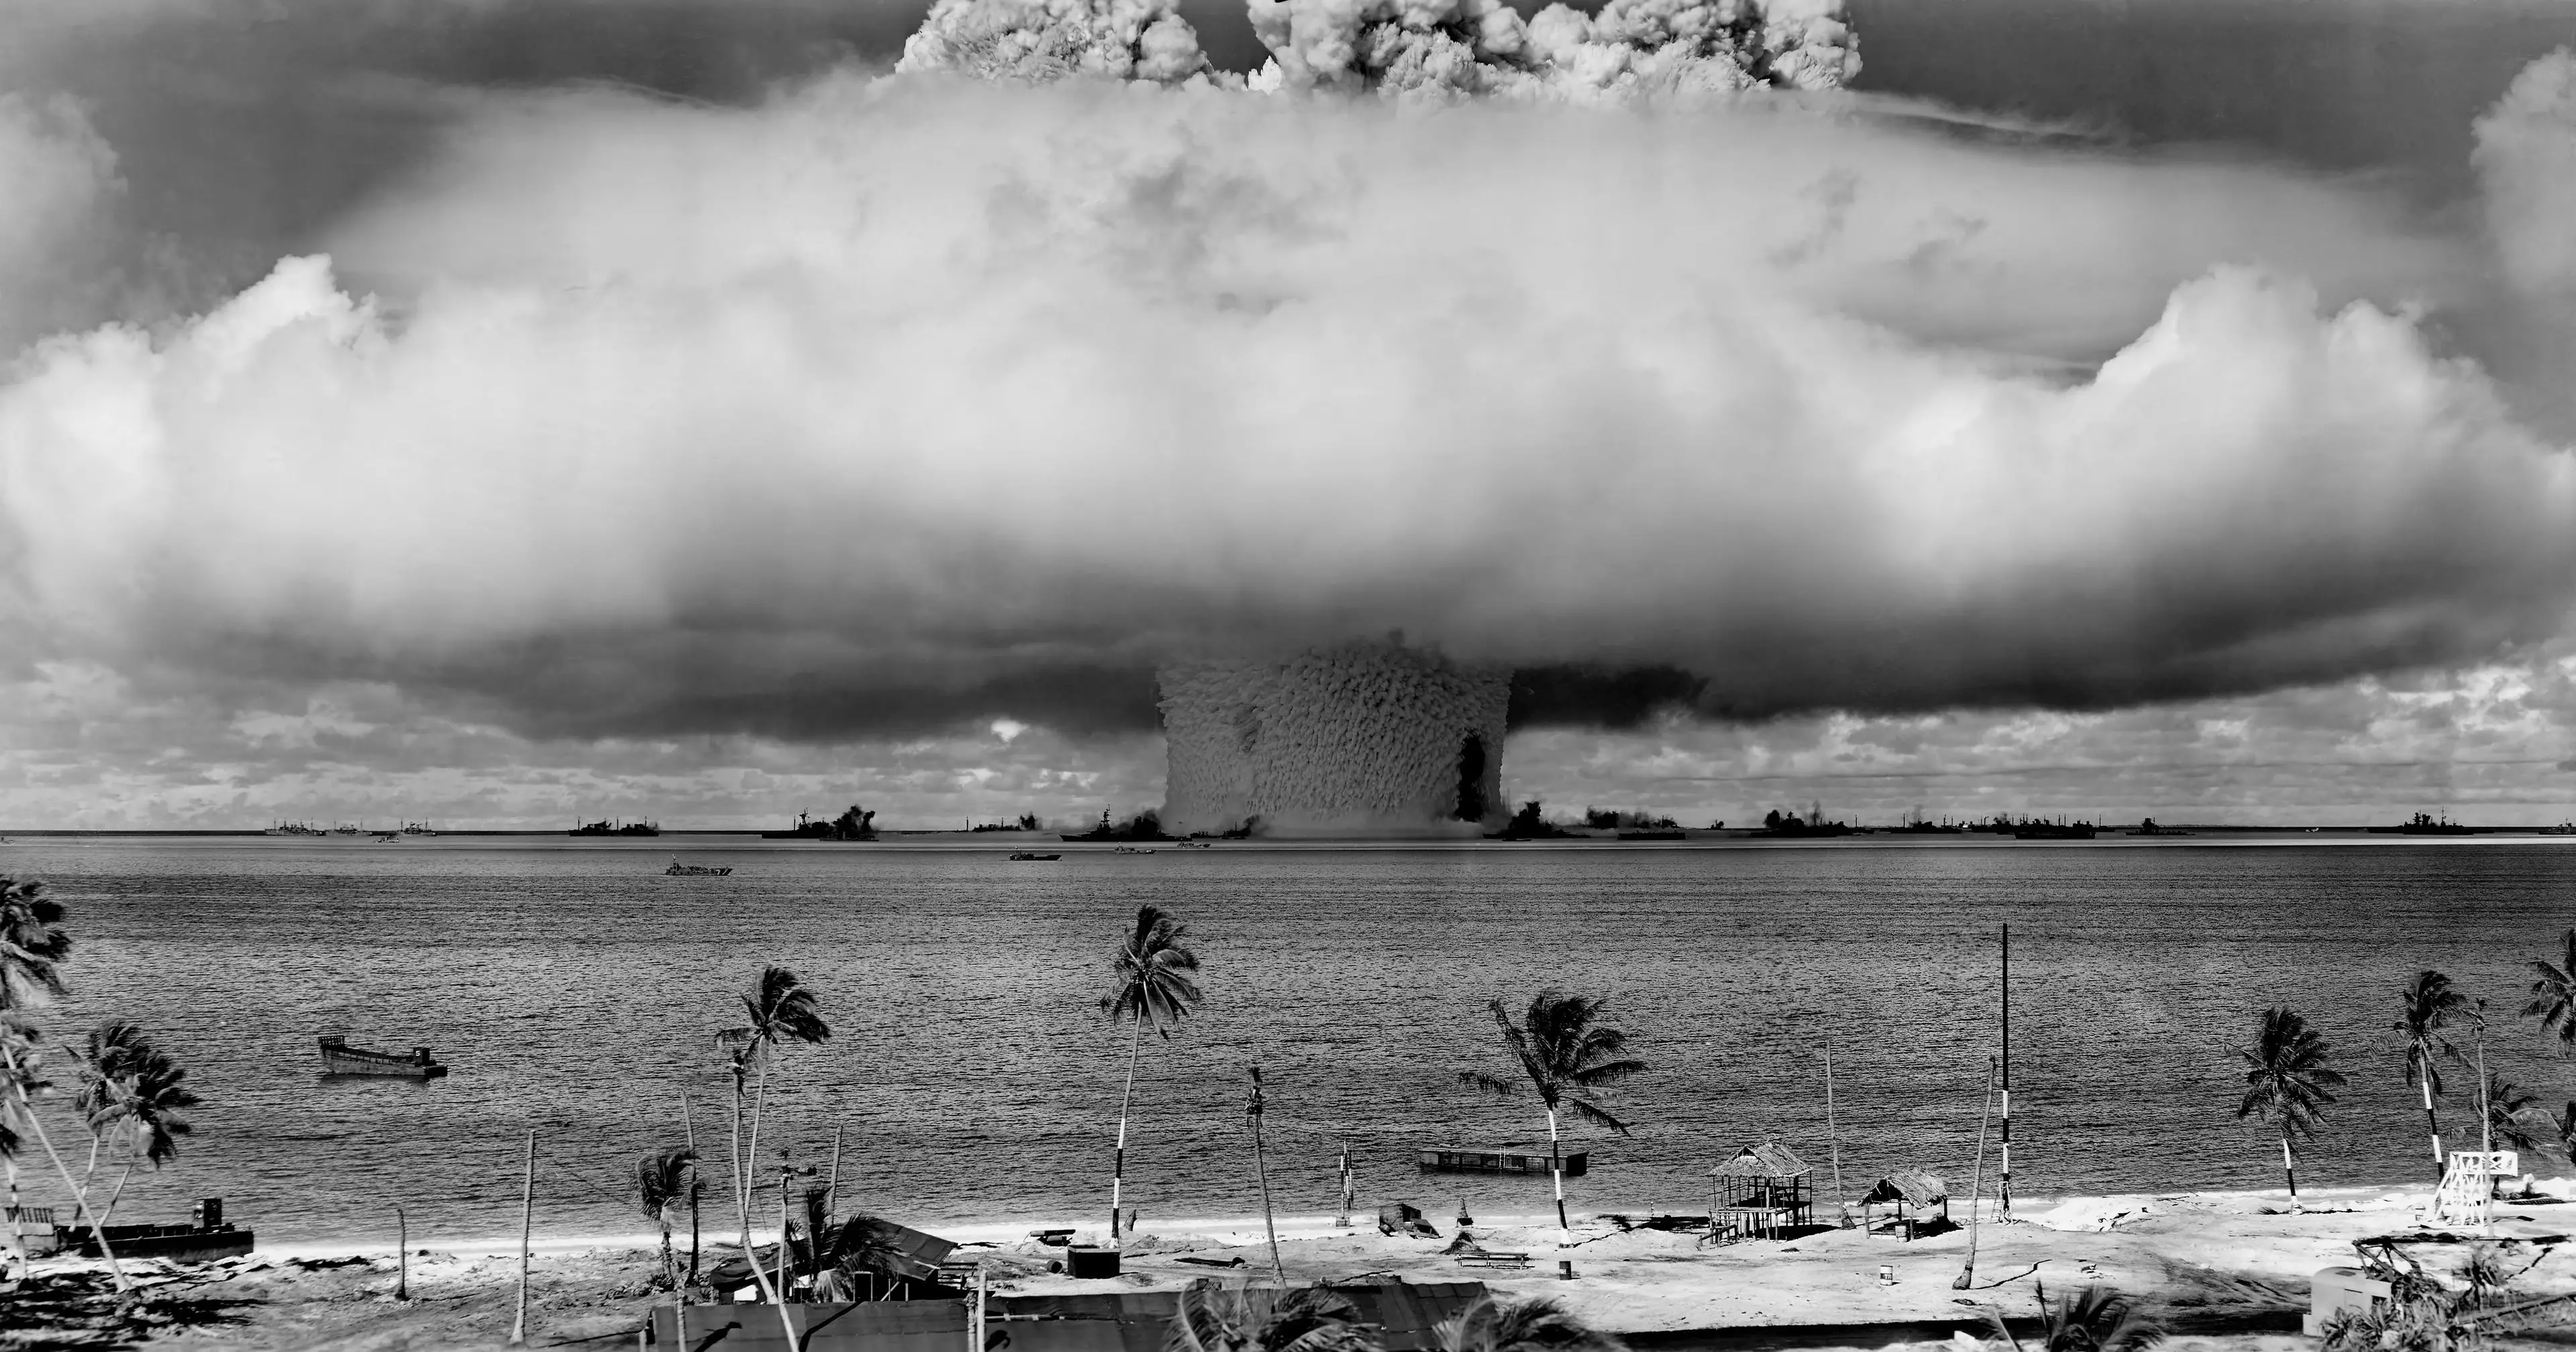 The Nuclear Apocalypse Is Coming, Here's Where You Need To Move To Survive